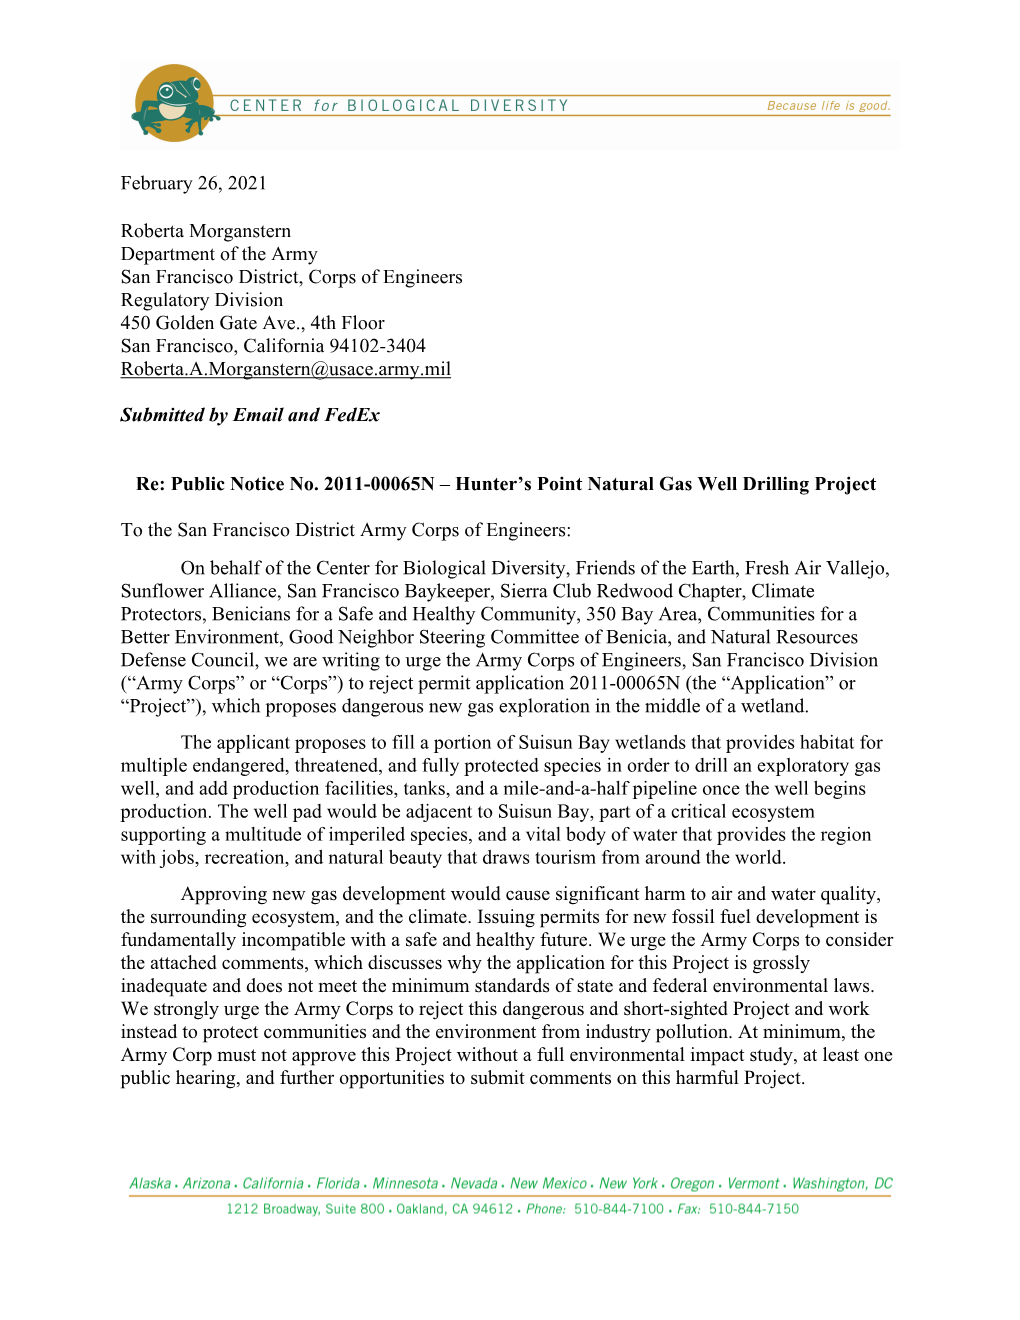 Hunters Point Gas Drilling Project Letter